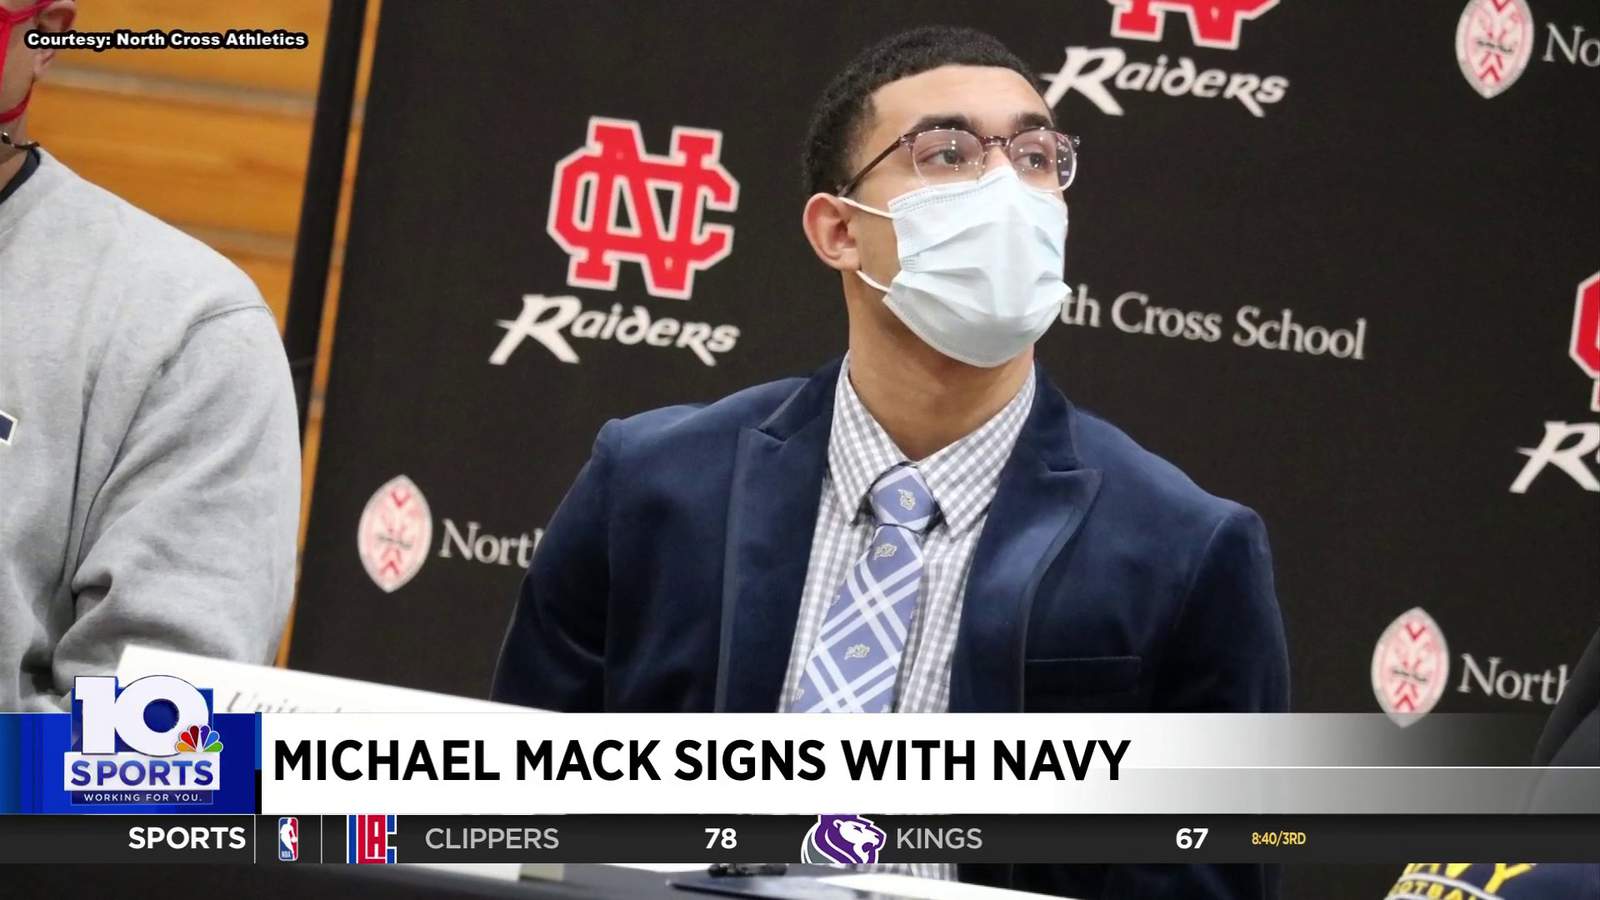 North Cross’ Michael Mack signs with Navy